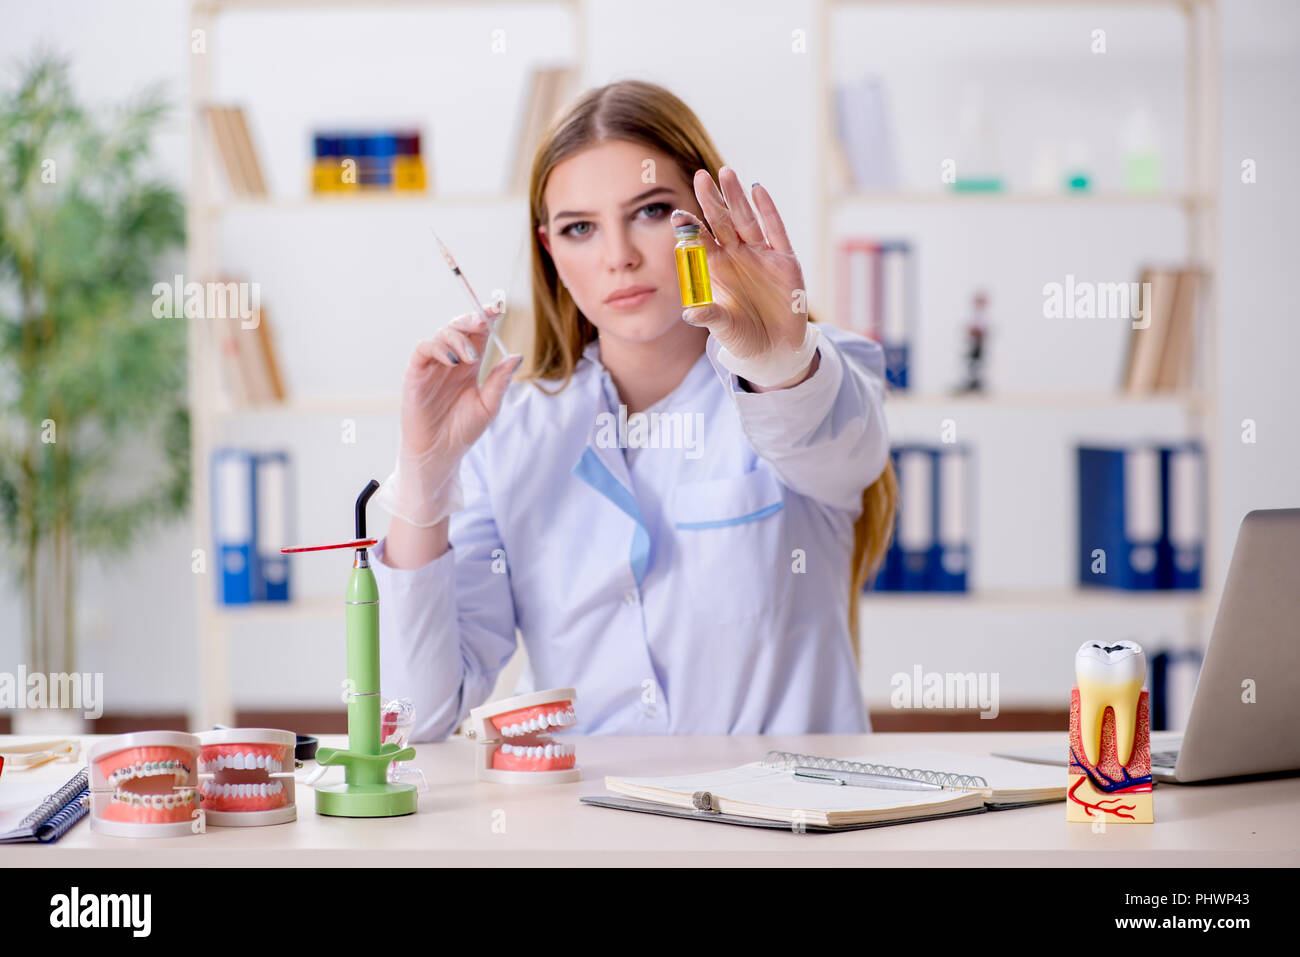 Dentistry student practicing skills in classroom Stock Photo